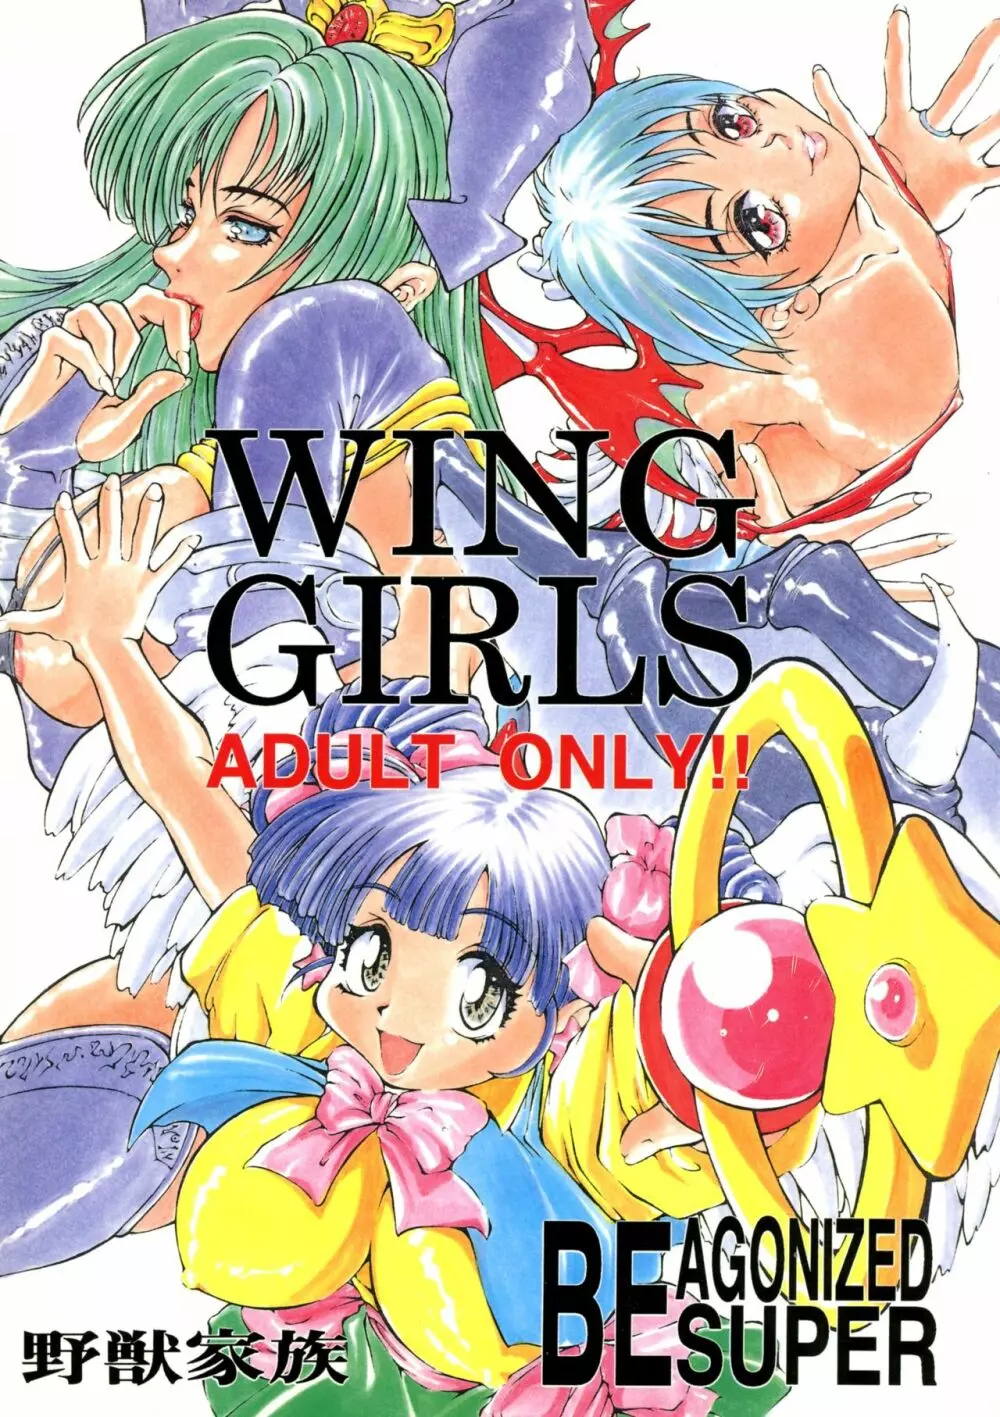 Be agonized super WING GIRLS